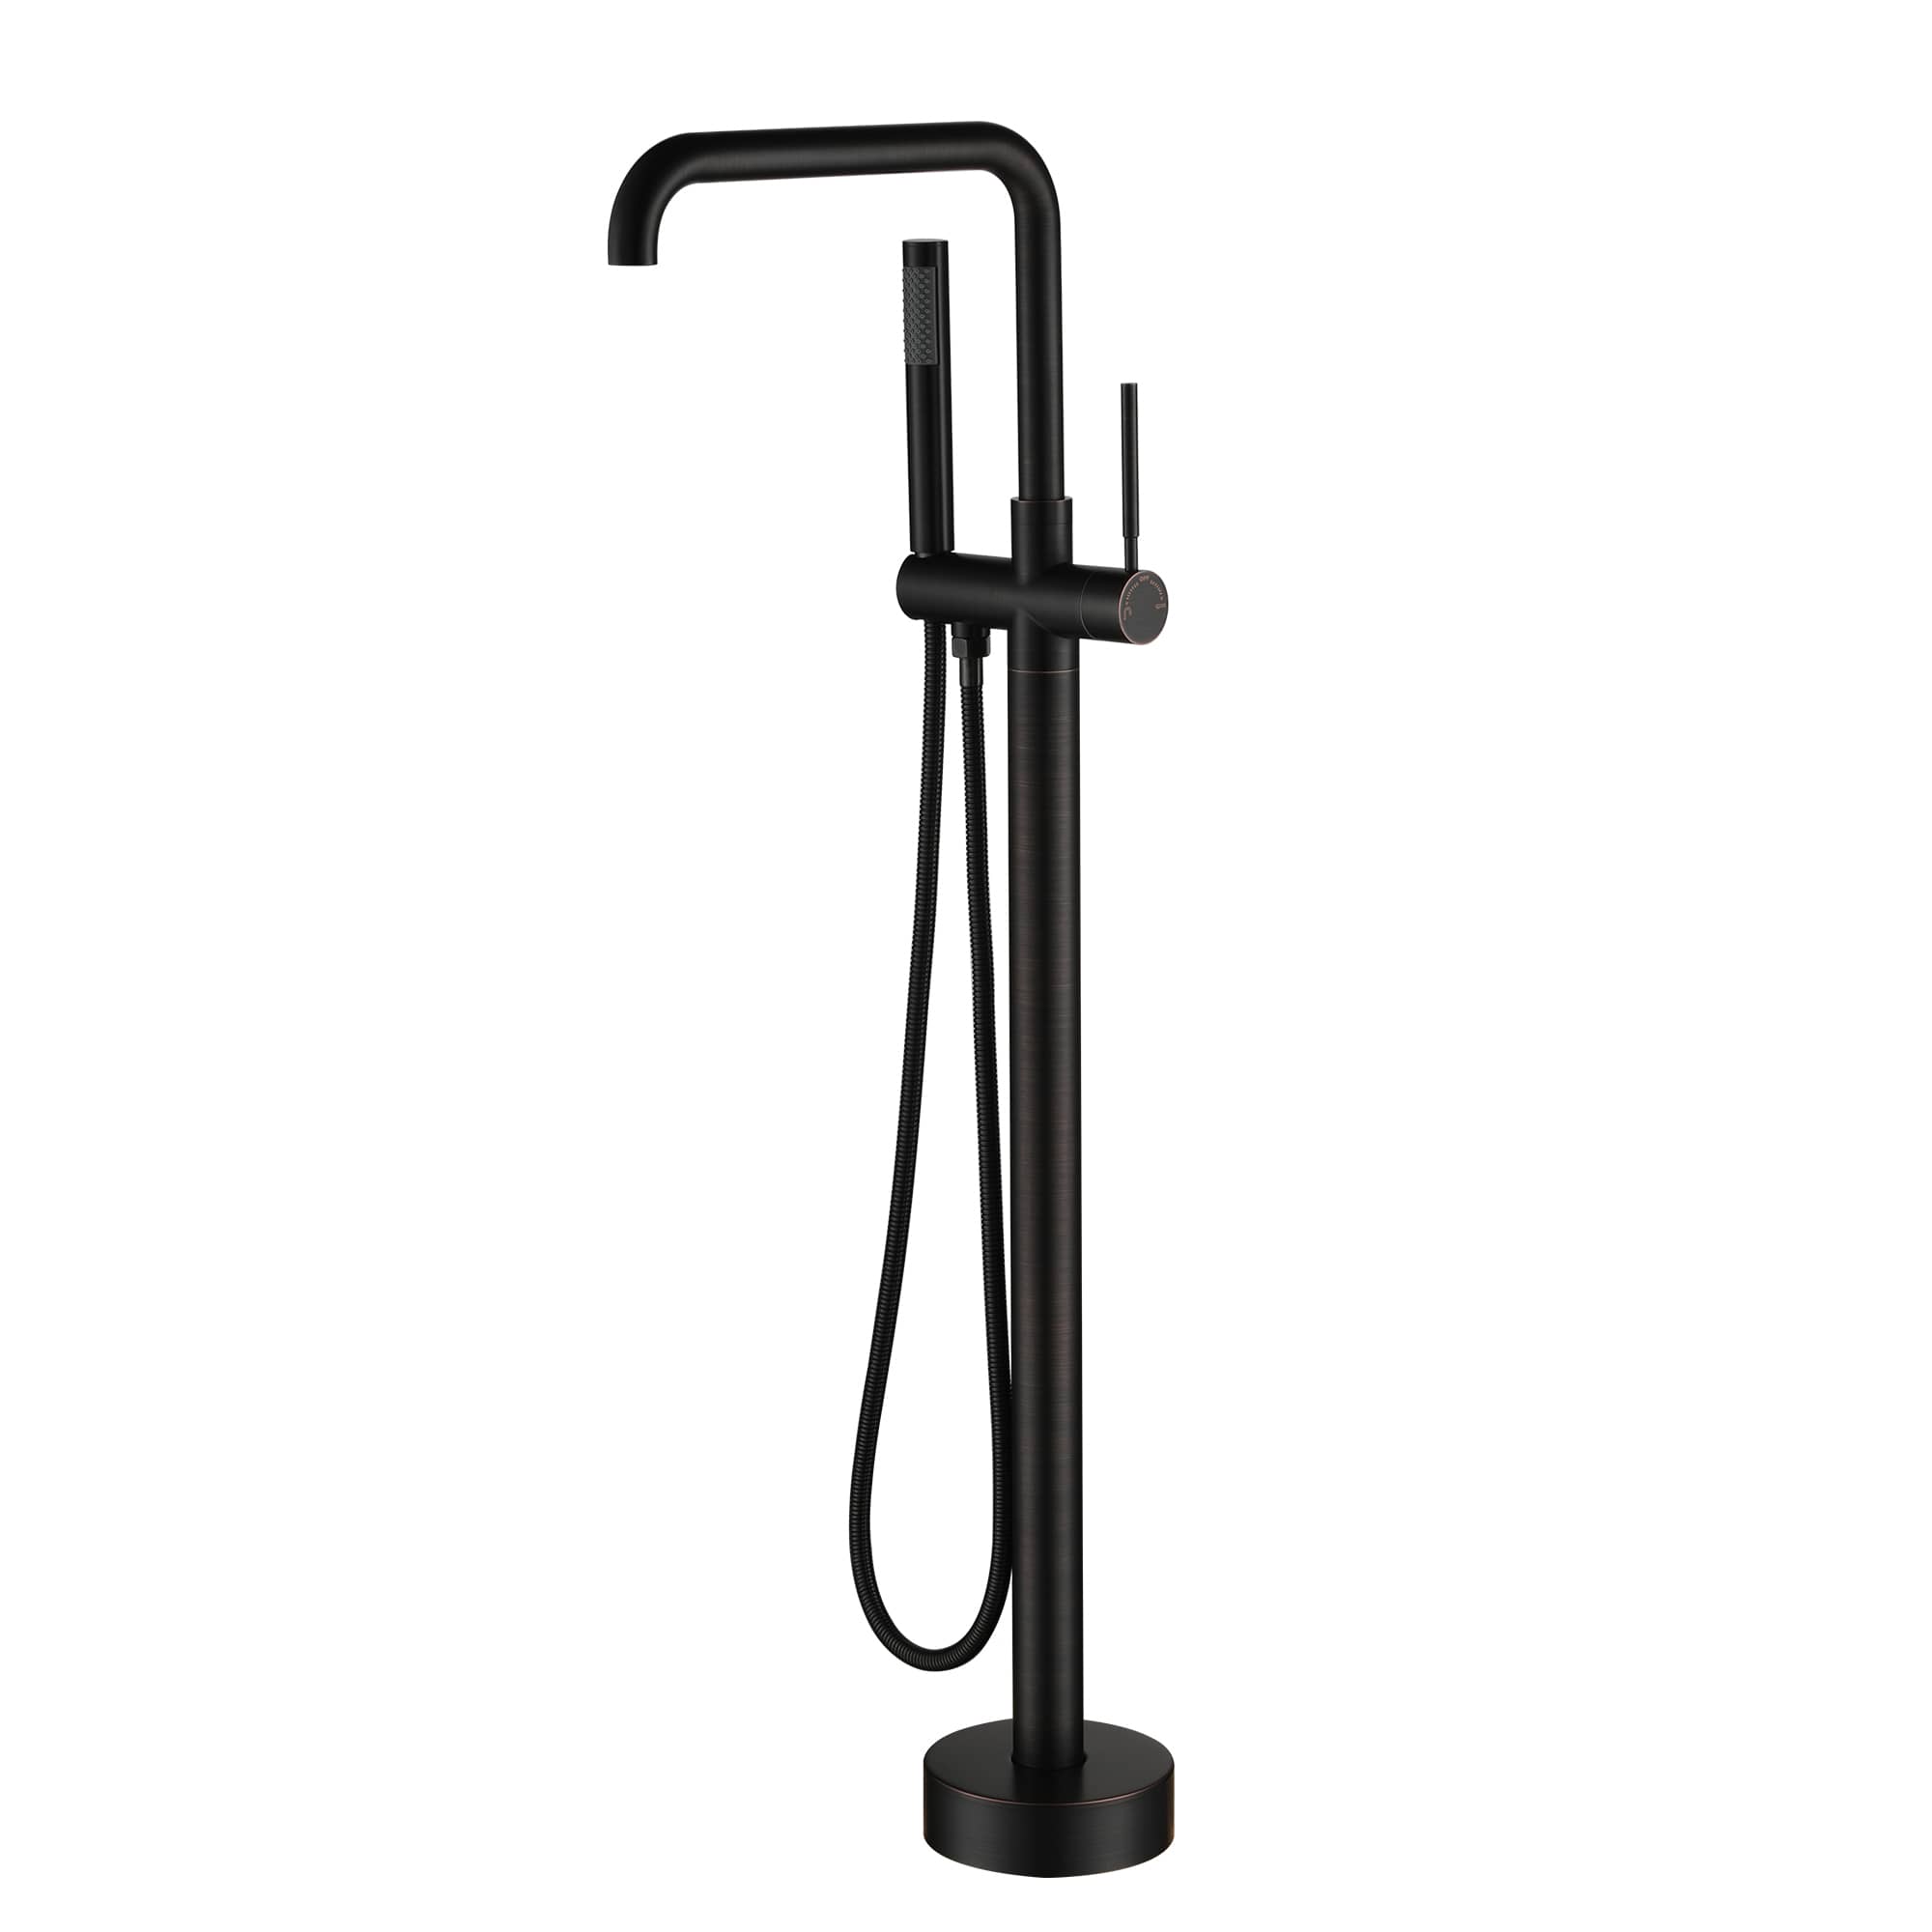 Casainc 1-Handle Freestanding Bathtub Faucet with Hand Shower in Brushed Nickel and More